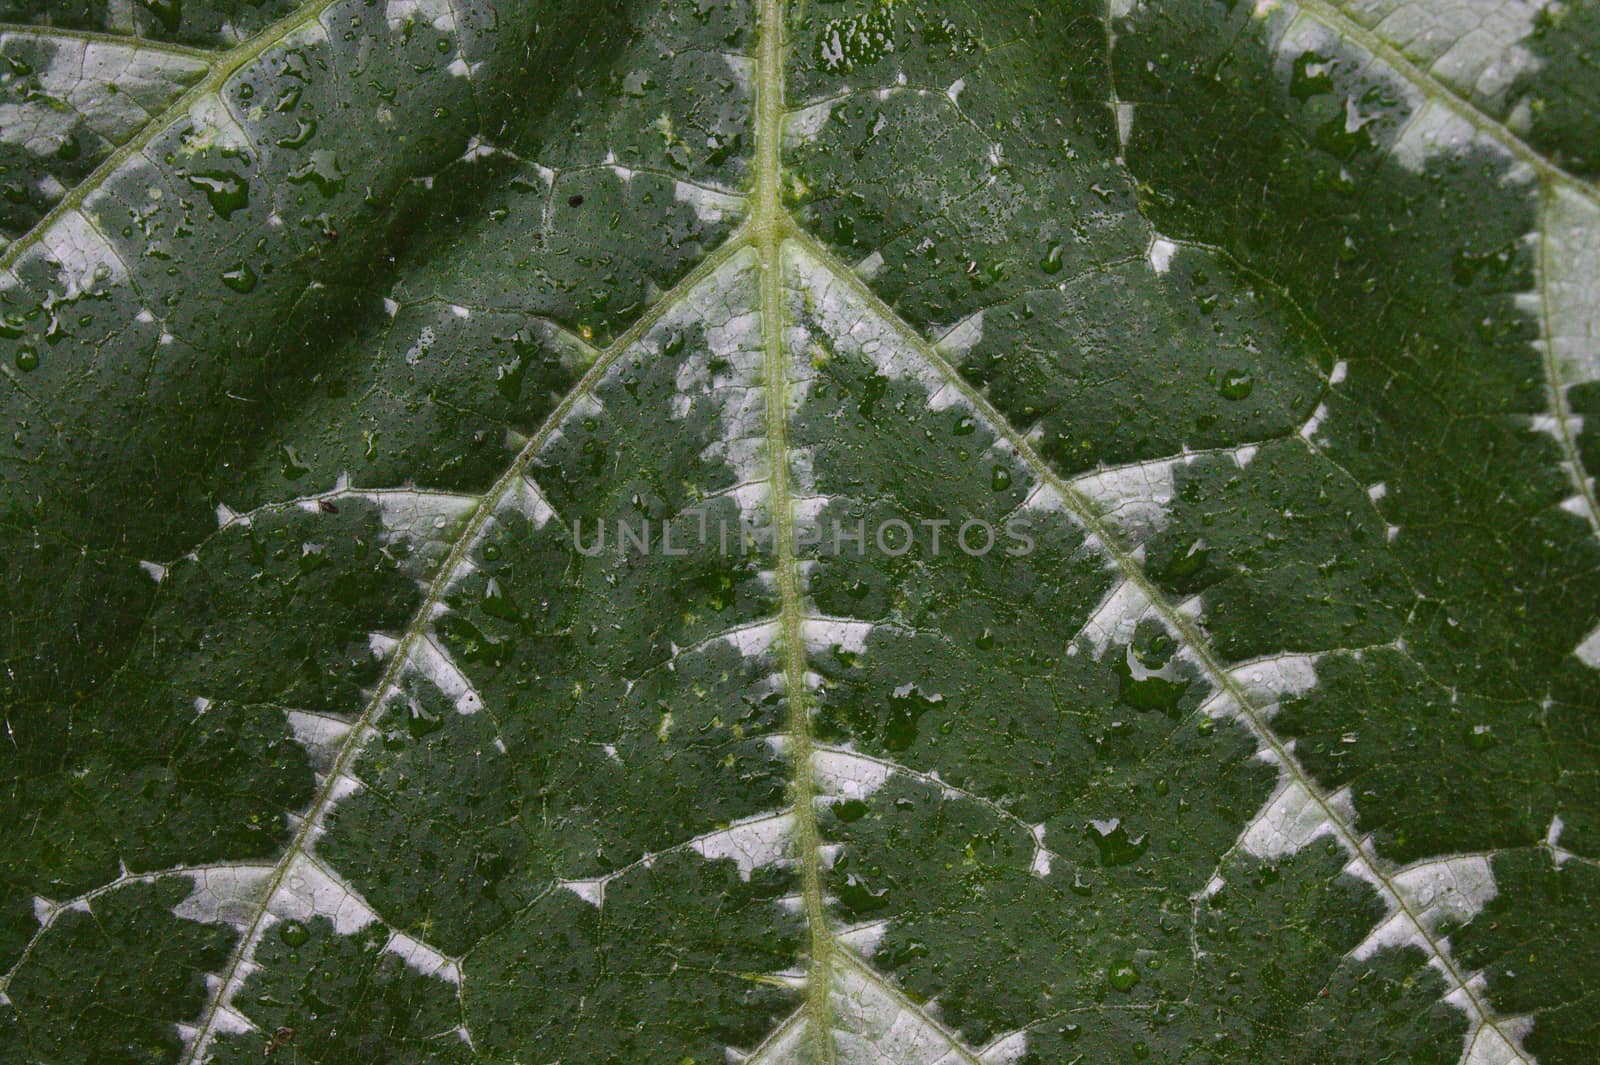 The picture shows a structure of a green leaf